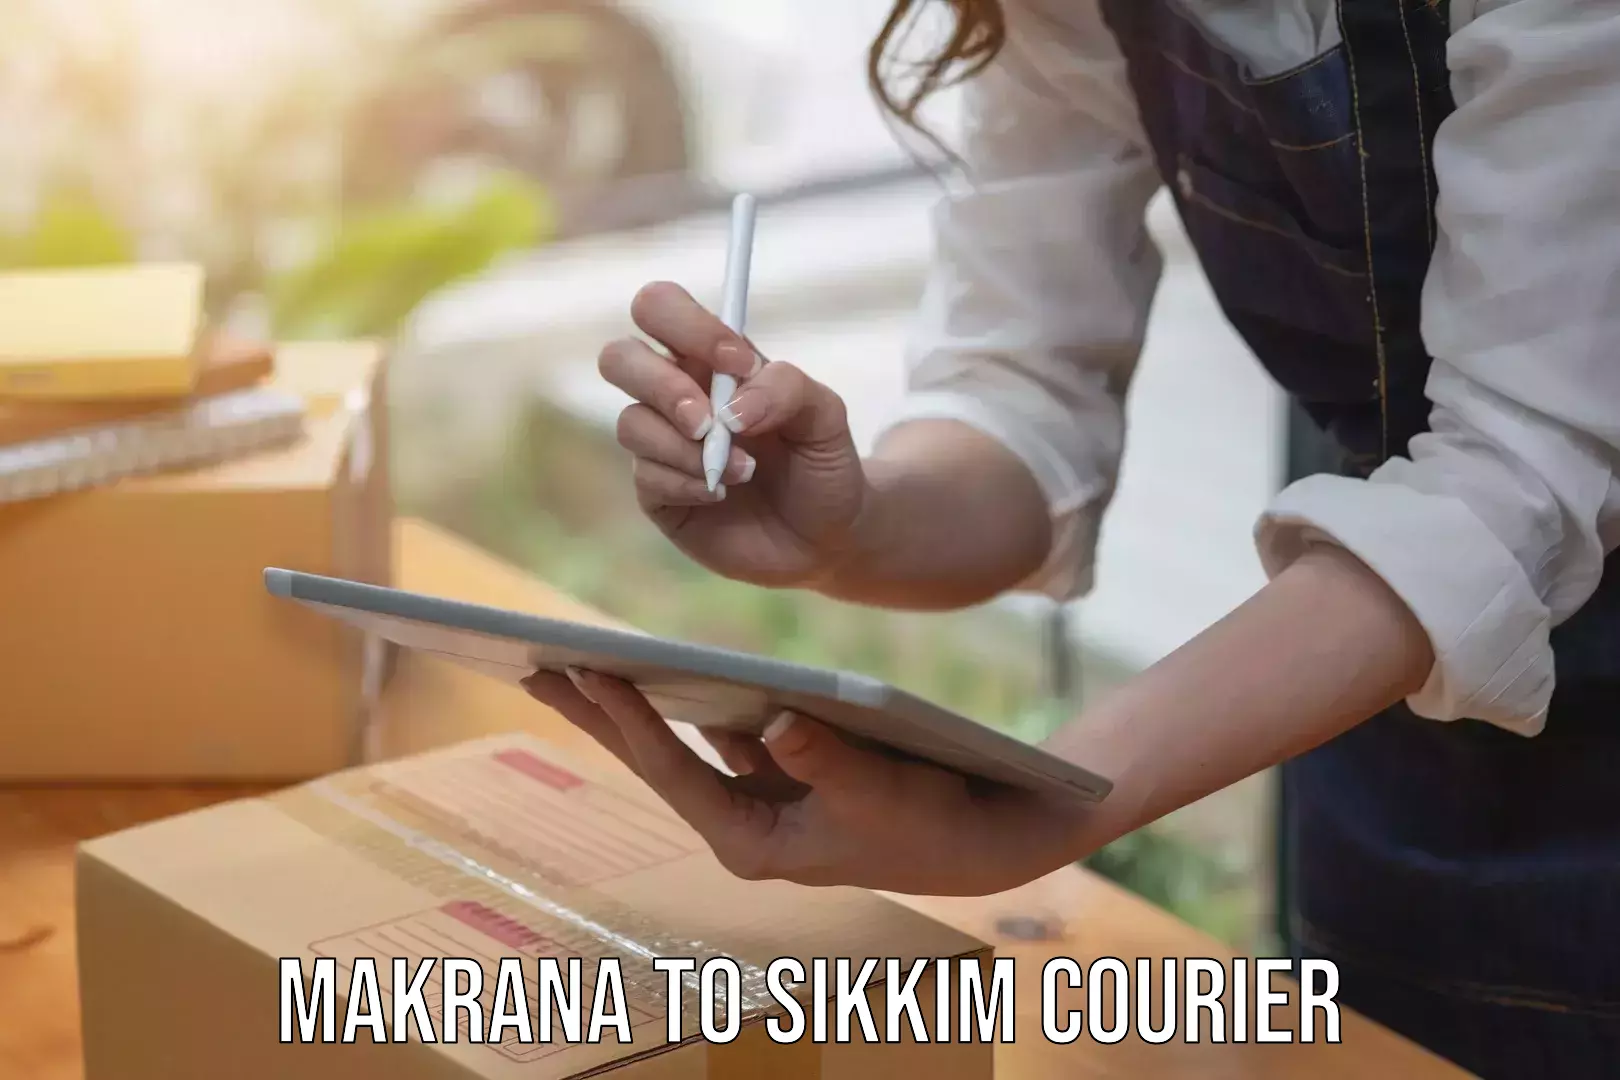 Multi-national courier services Makrana to Pelling